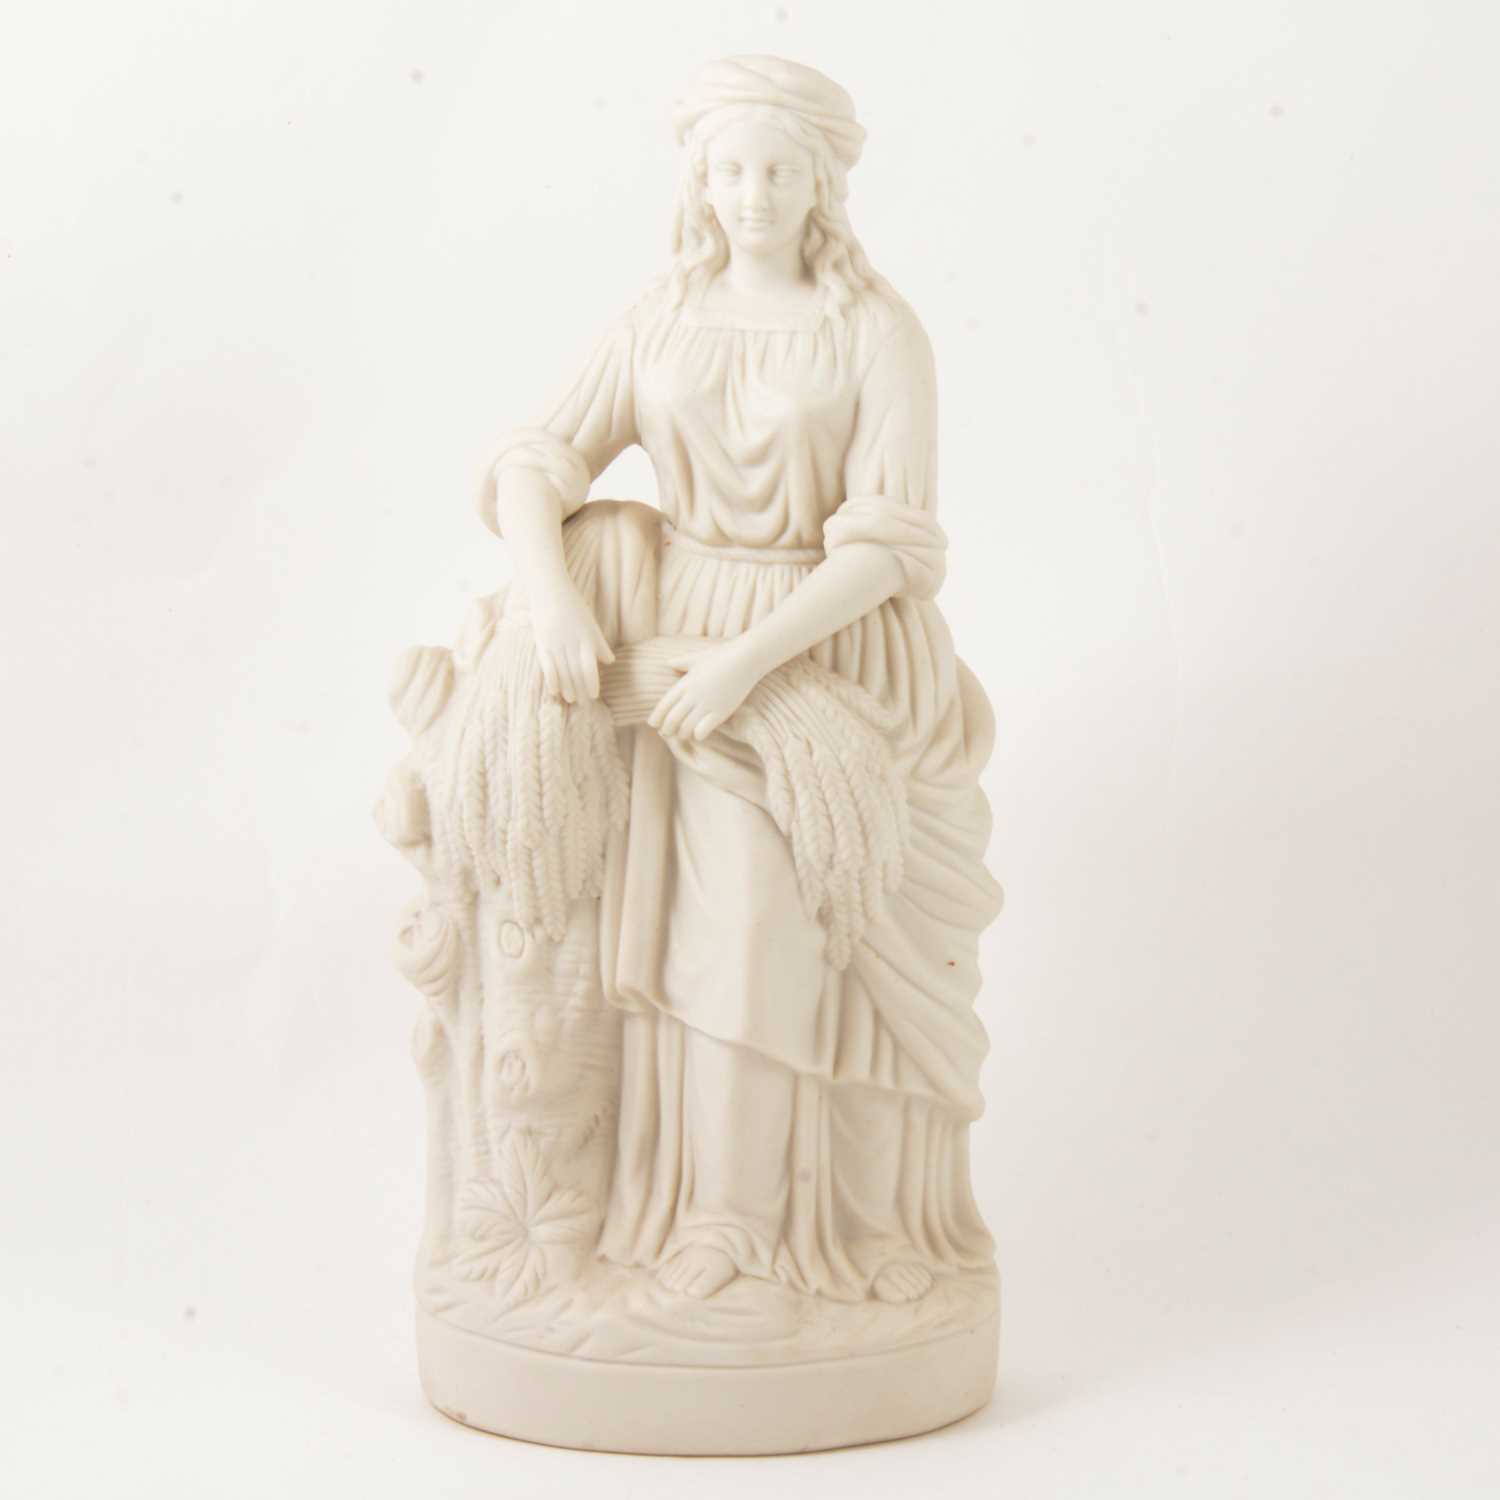 Lot 59 - Parian figure, Ruth, with wheat sheaves.